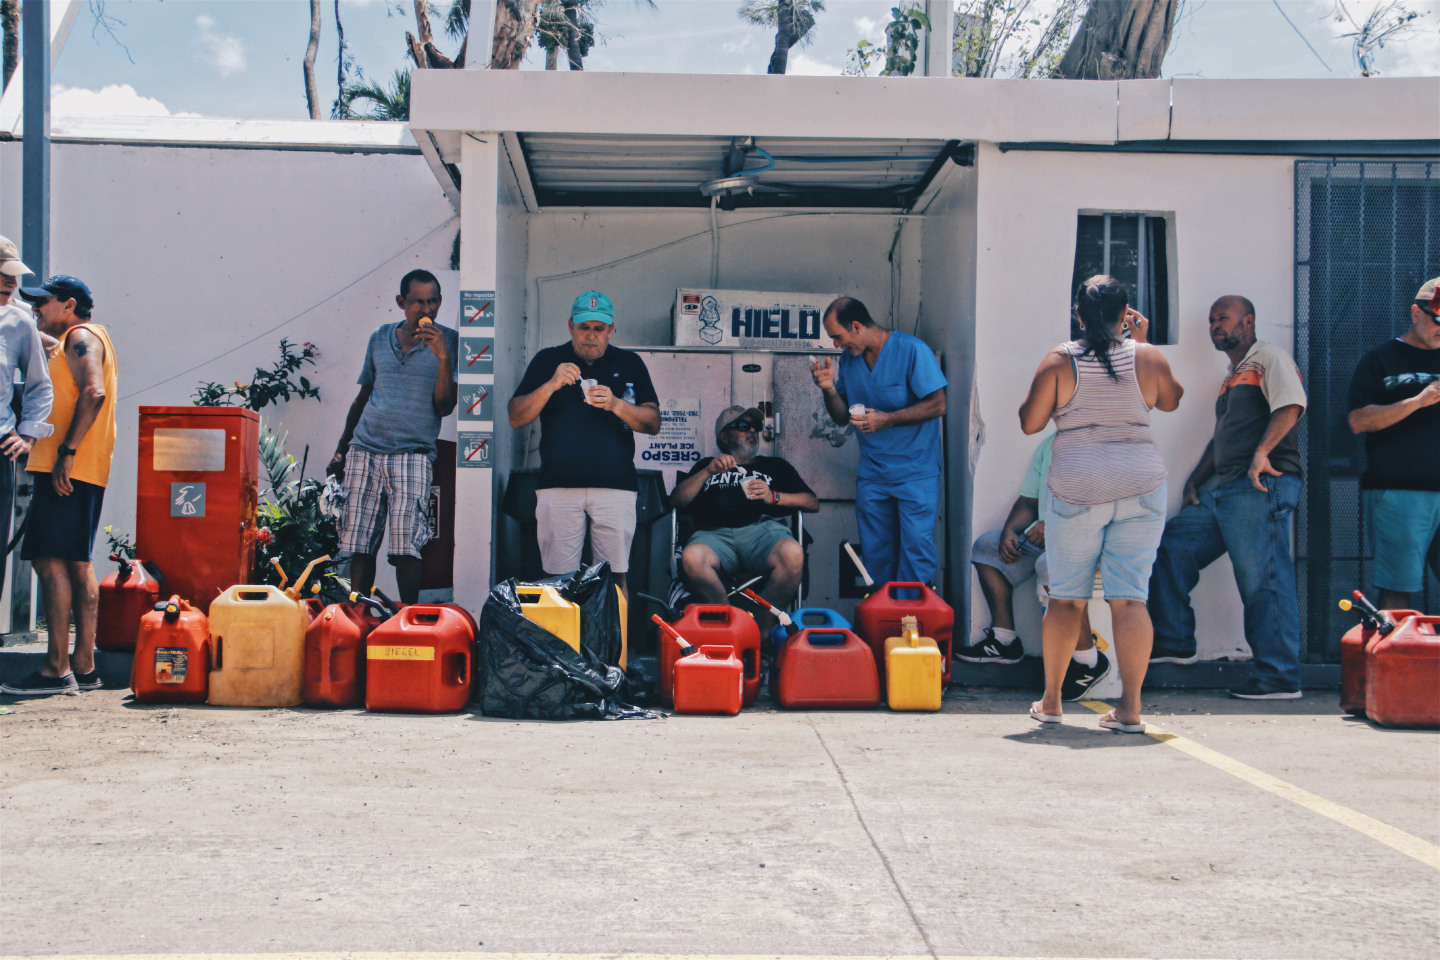 These photos show just how much Puerto Rico still needs our help